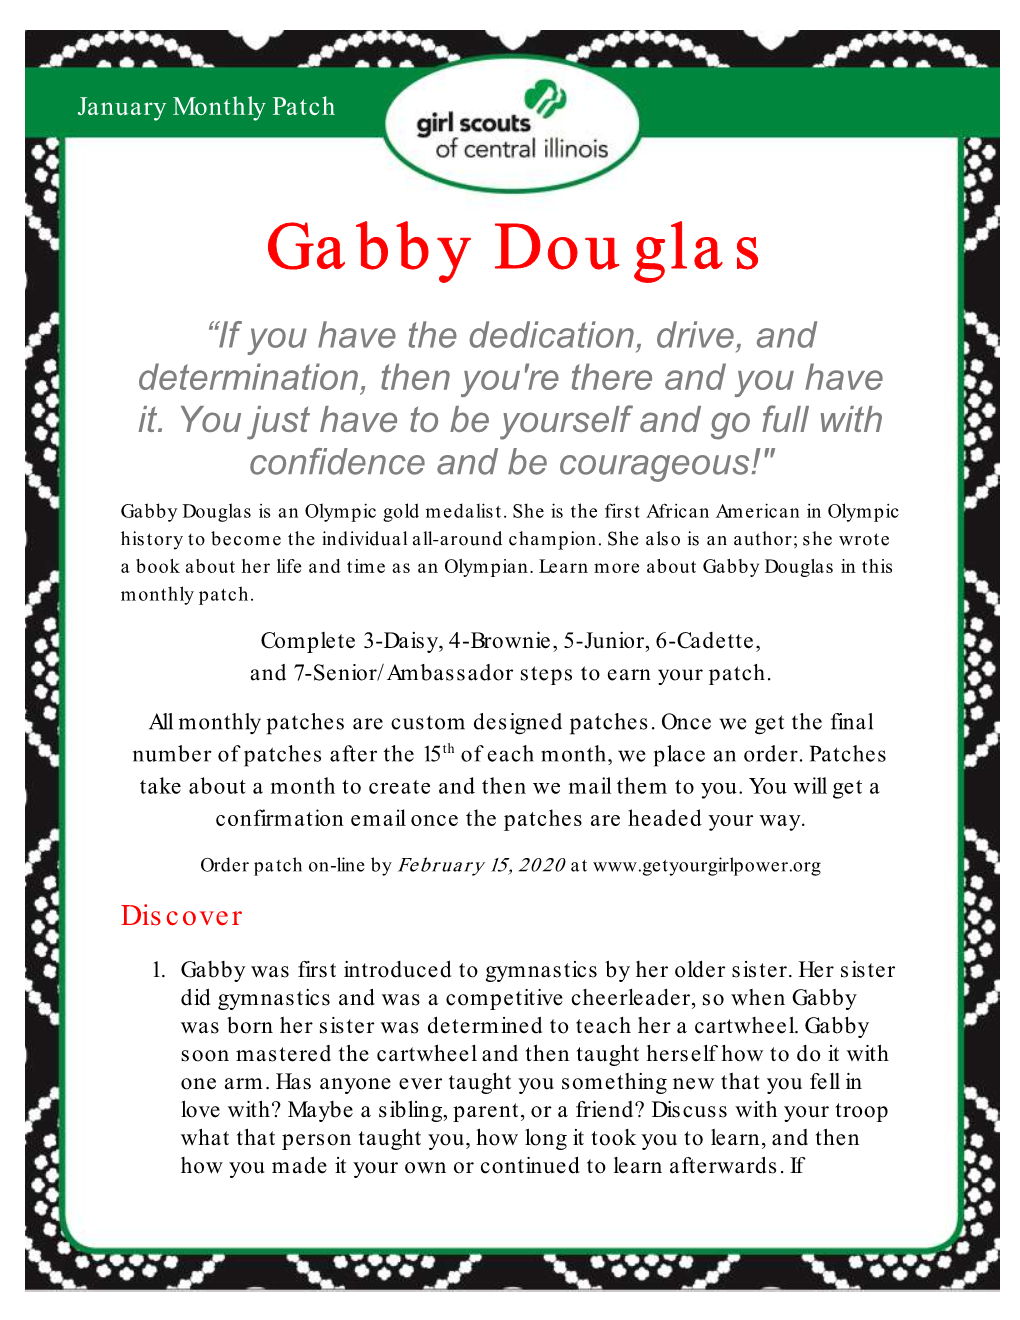 Gabby Douglas “If You Have the Dedication, Drive, and Determination, Then You're There and You Have It